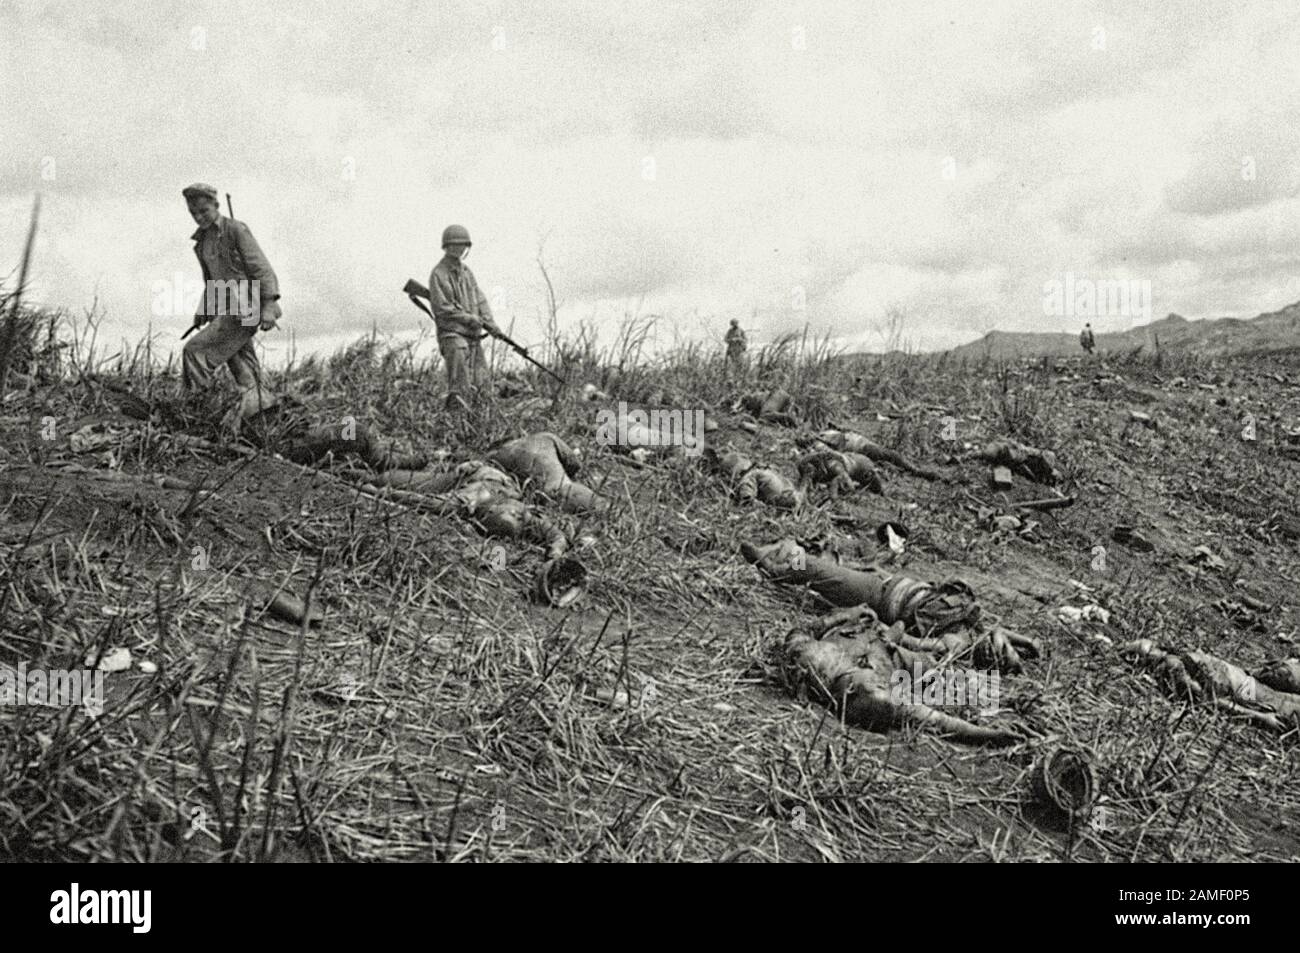 US Marines inspect the bodies of Japanese soldiers after an unsuccessful banzai attack on one of the hills in the Battle of Guam. The island of Guam w Stock Photo